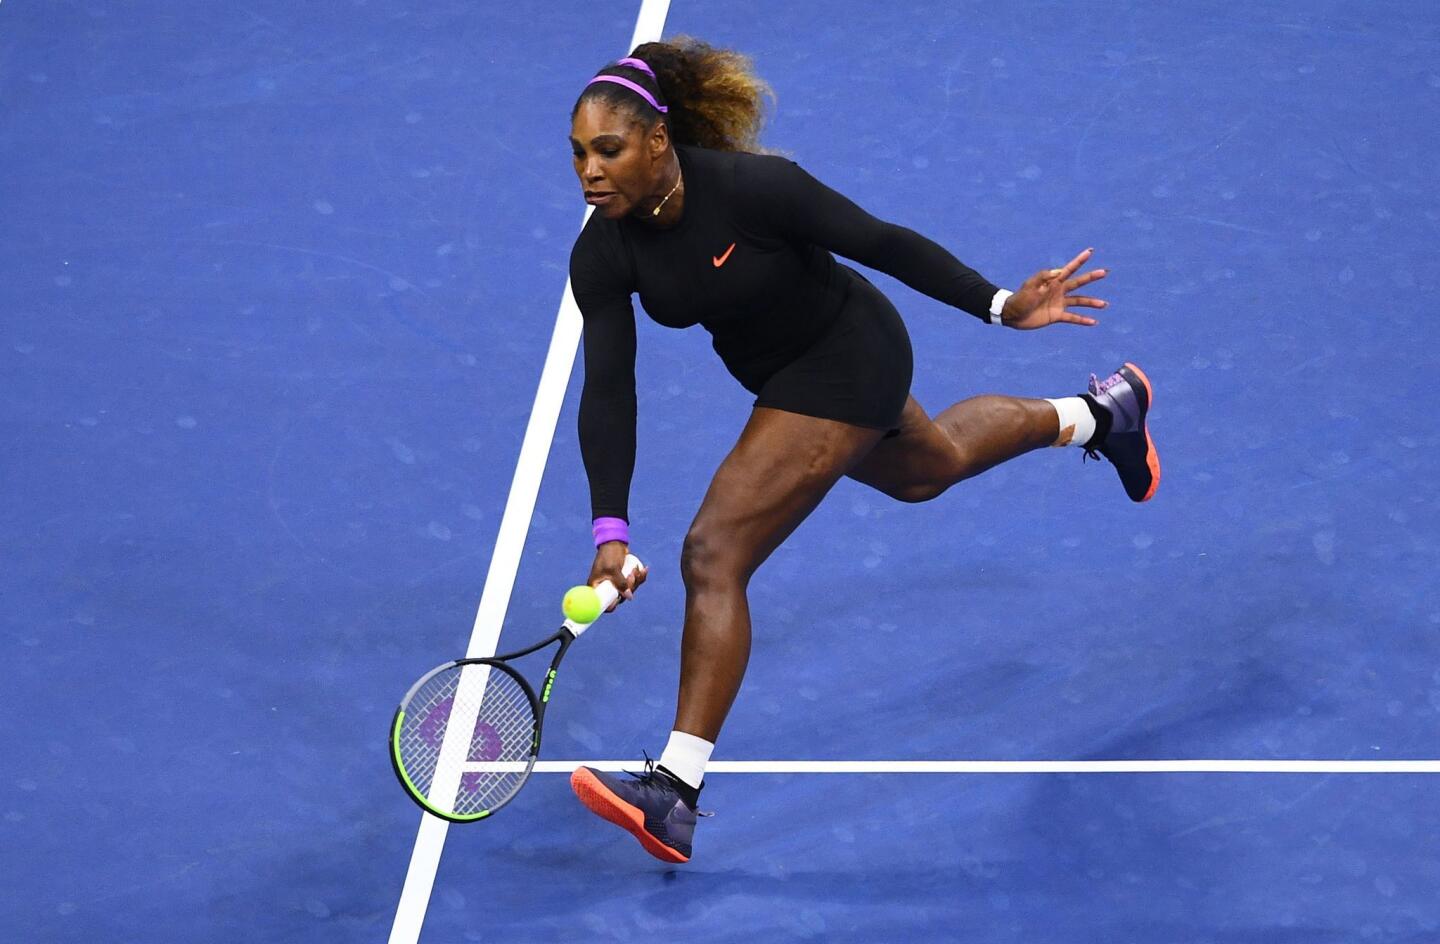 Serena Williams returns the ball against Elina Svitolina during their Women's Singles semifinal match inside the Billie Jean King National Tennis Center in Queens on Sept. 5, 2019.